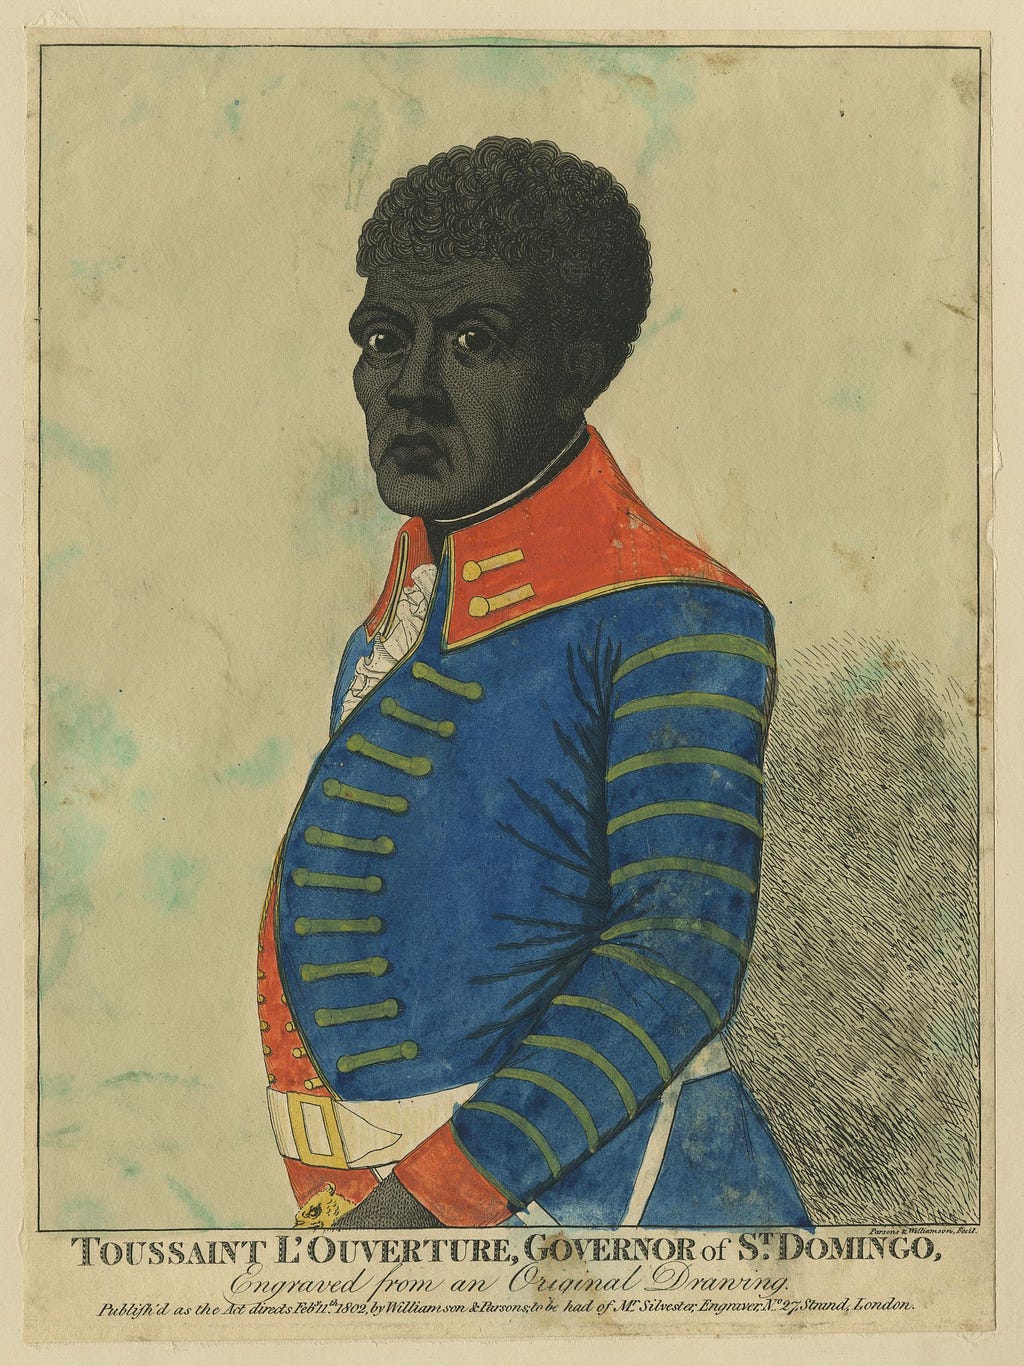 Coloured illustration of Toussaint Louverture, Governor of St. Domingo, wearing a blue and red military jacket.